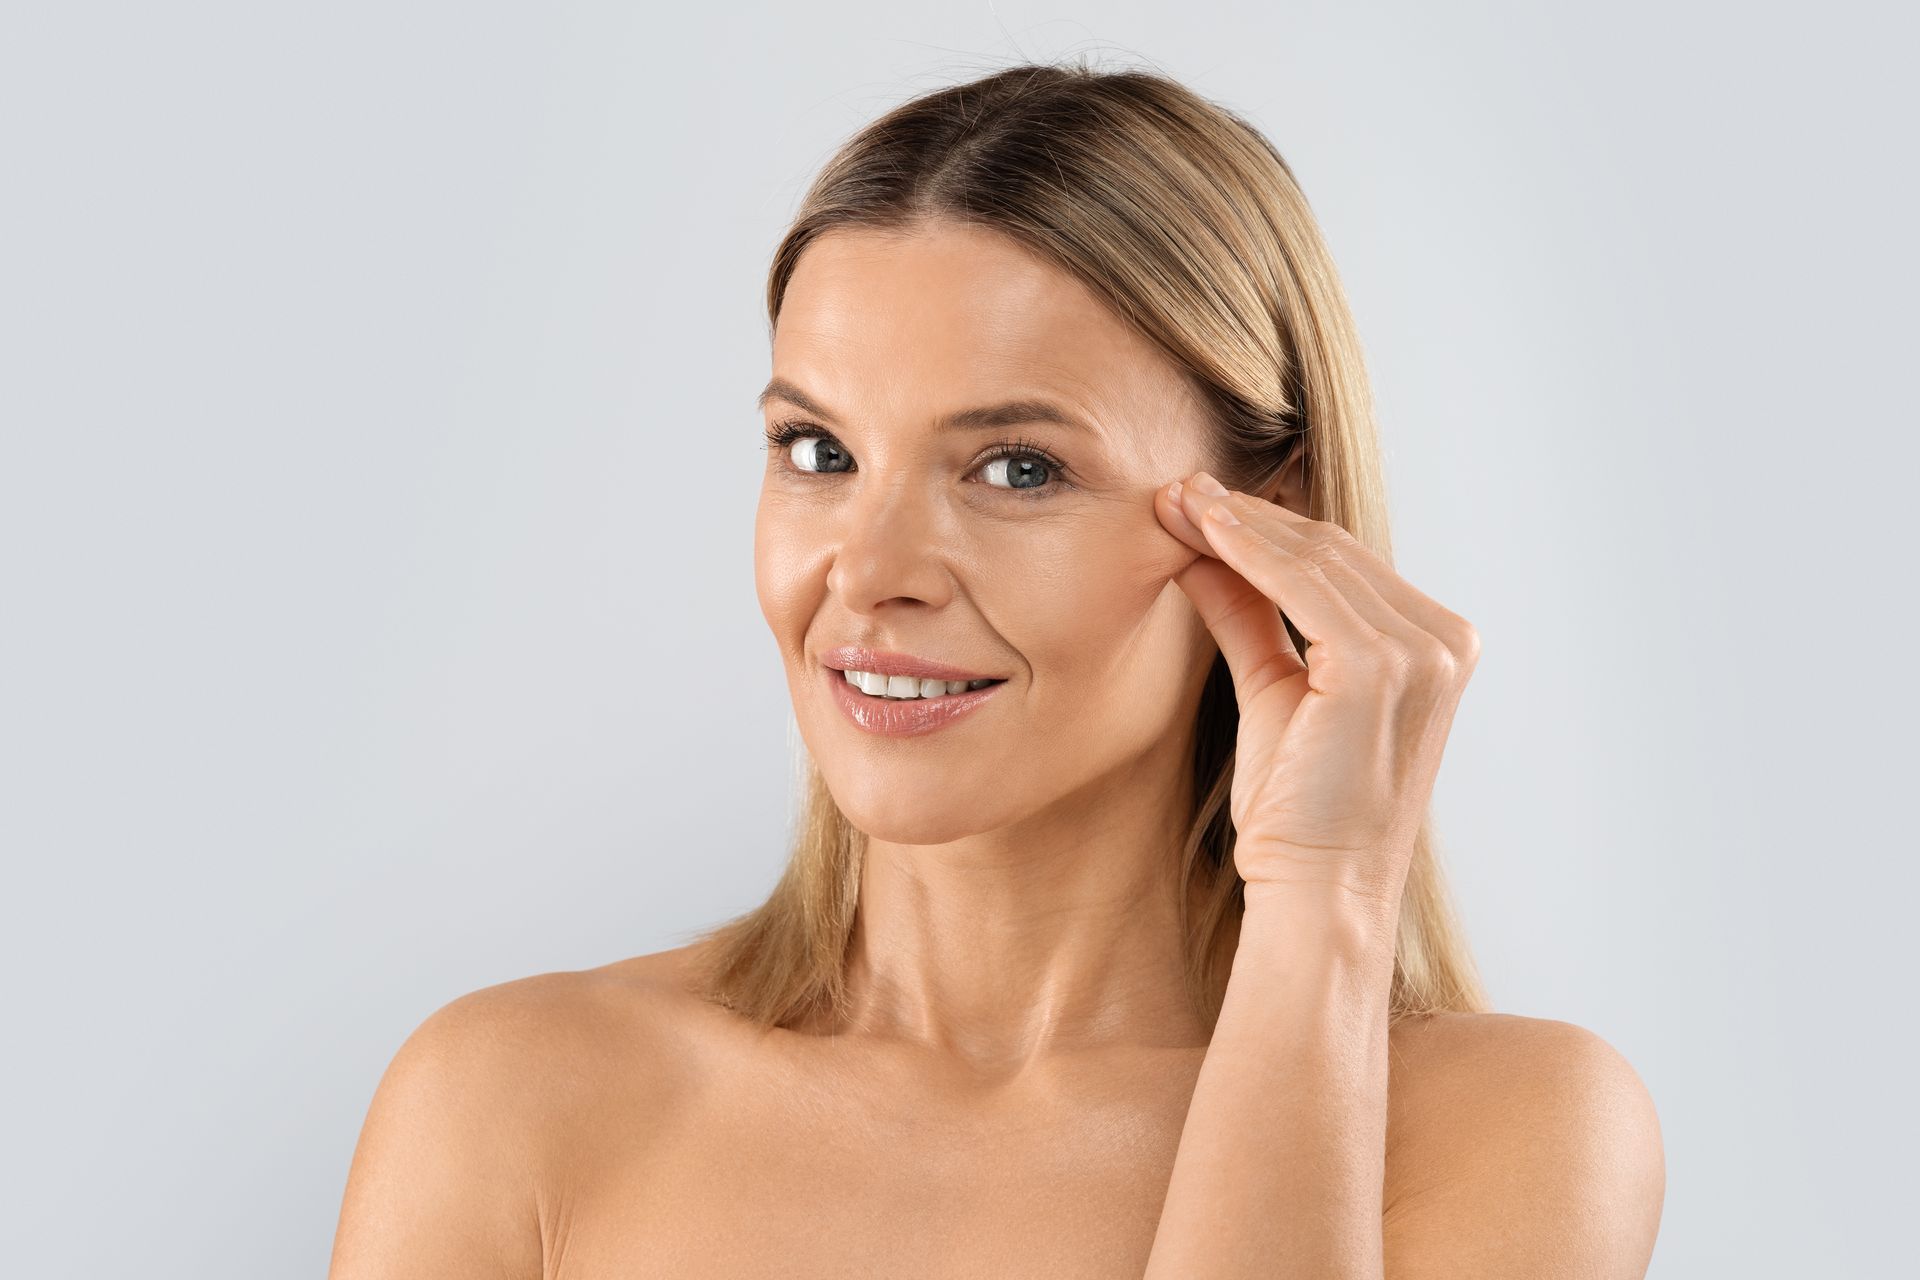 A woman is touching her face with her hand and smiling.